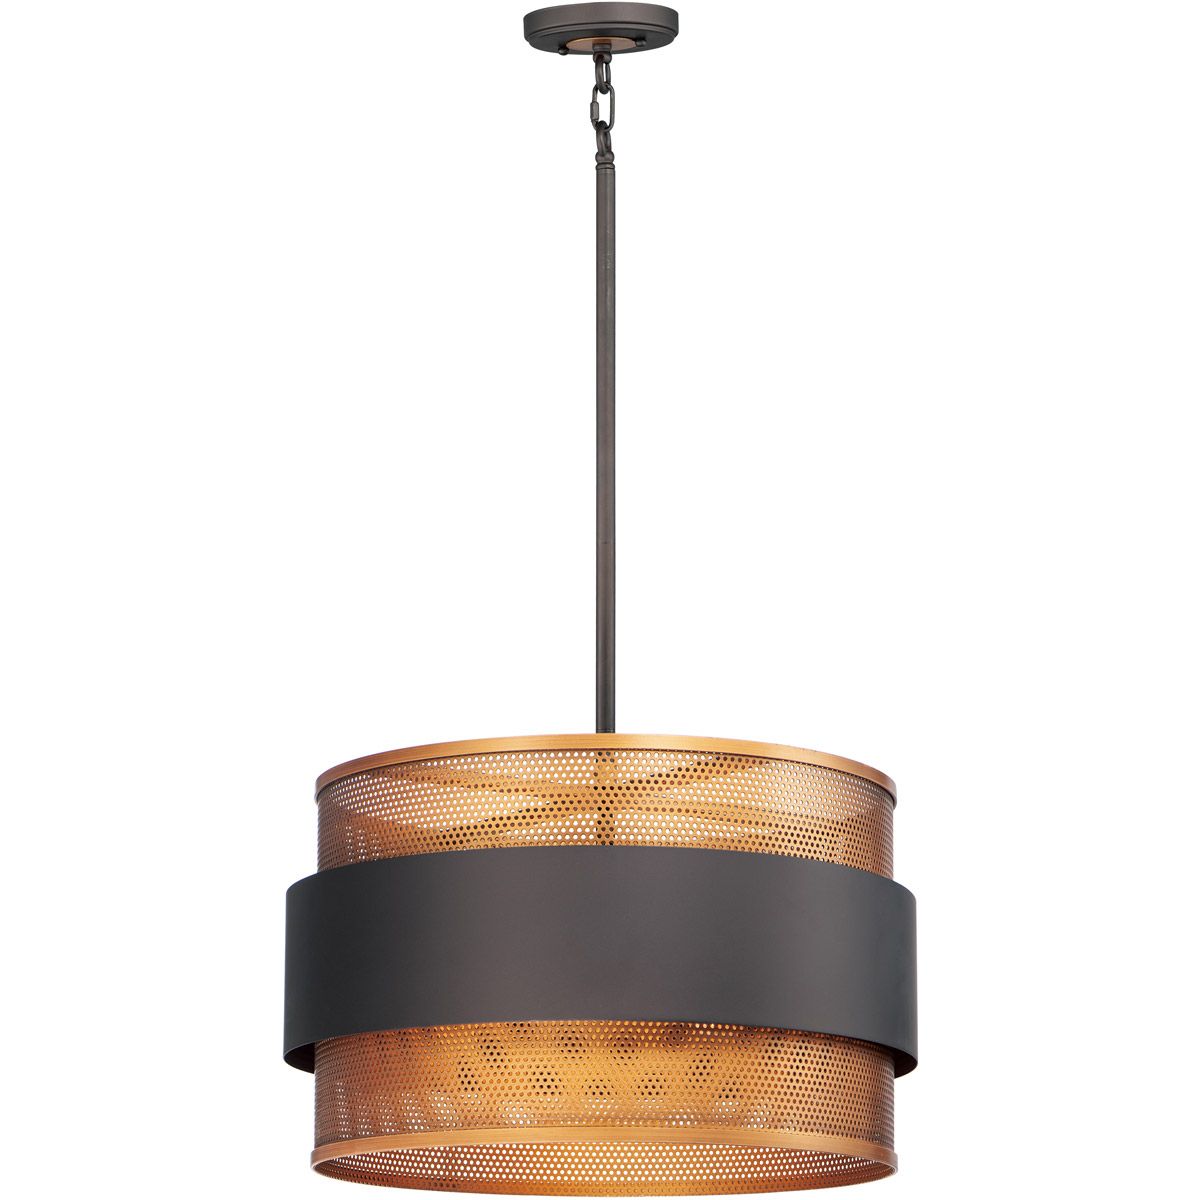 Popular Maxim Lighting 31204Oiab Caspian Pendant Oil Rubbed Bronze Throughout Oil Rubbed Bronze And Antique Brass Four Light Chandeliers (View 4 of 15)